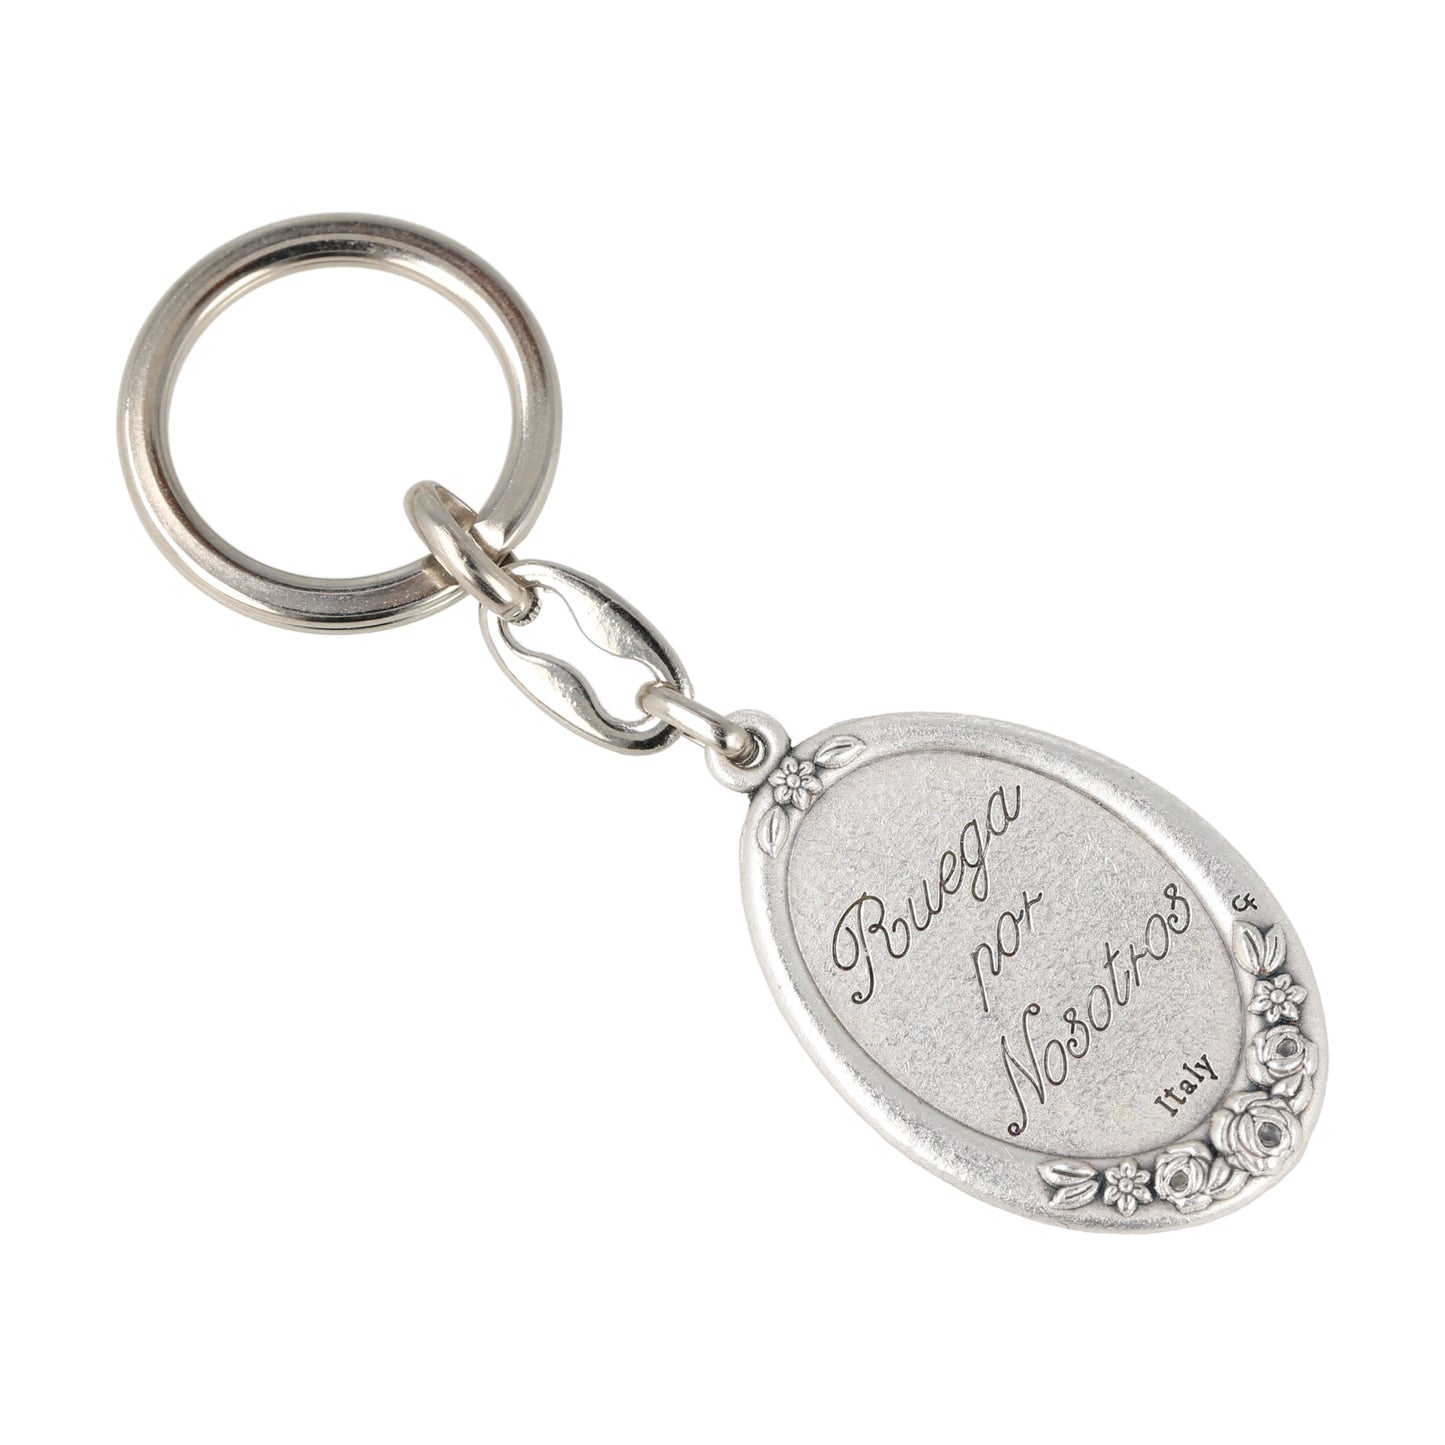 Keychain Schoenstatt Oval Silver With Flowers. Souvenirs from Italy